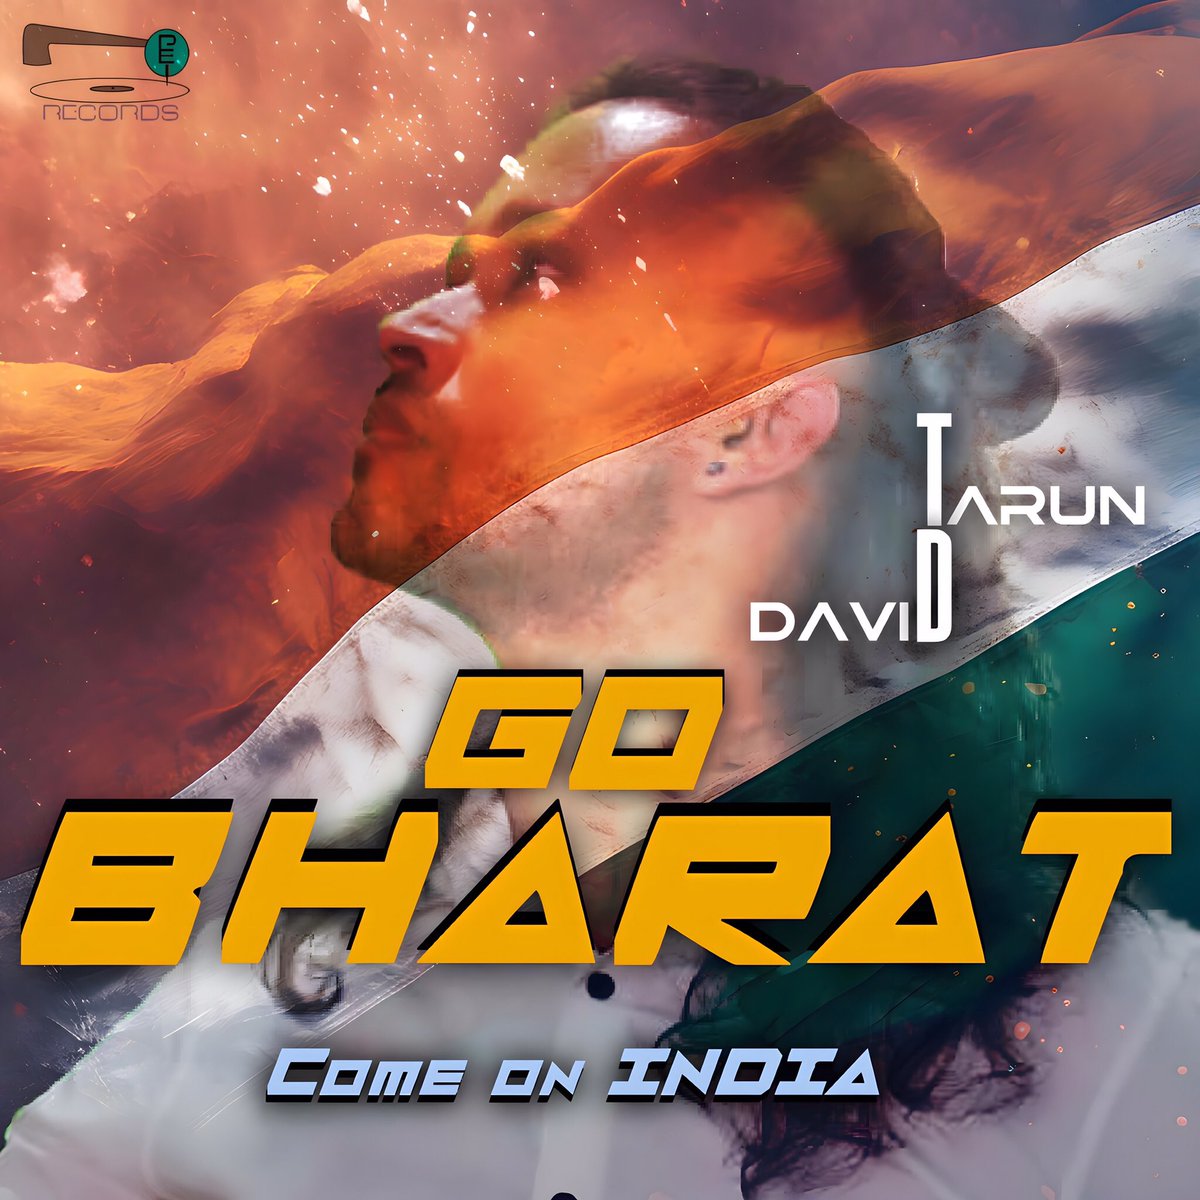 youtu.be/NCHbUj3ja30?si…

An ode to the every INDIAN, a call for ONE VOICE—ONE SOUL—ONE SPIRIT!

I give you, 'GO BHARAT (Come on India)',my all new Single! 

“BHARAT = INDIA = BHARAT”

Download NOW: tarundavid.bandcamp.com/track/go-bhara…

#Bharat #india #gobharat #tarundavid #Lakshadweep